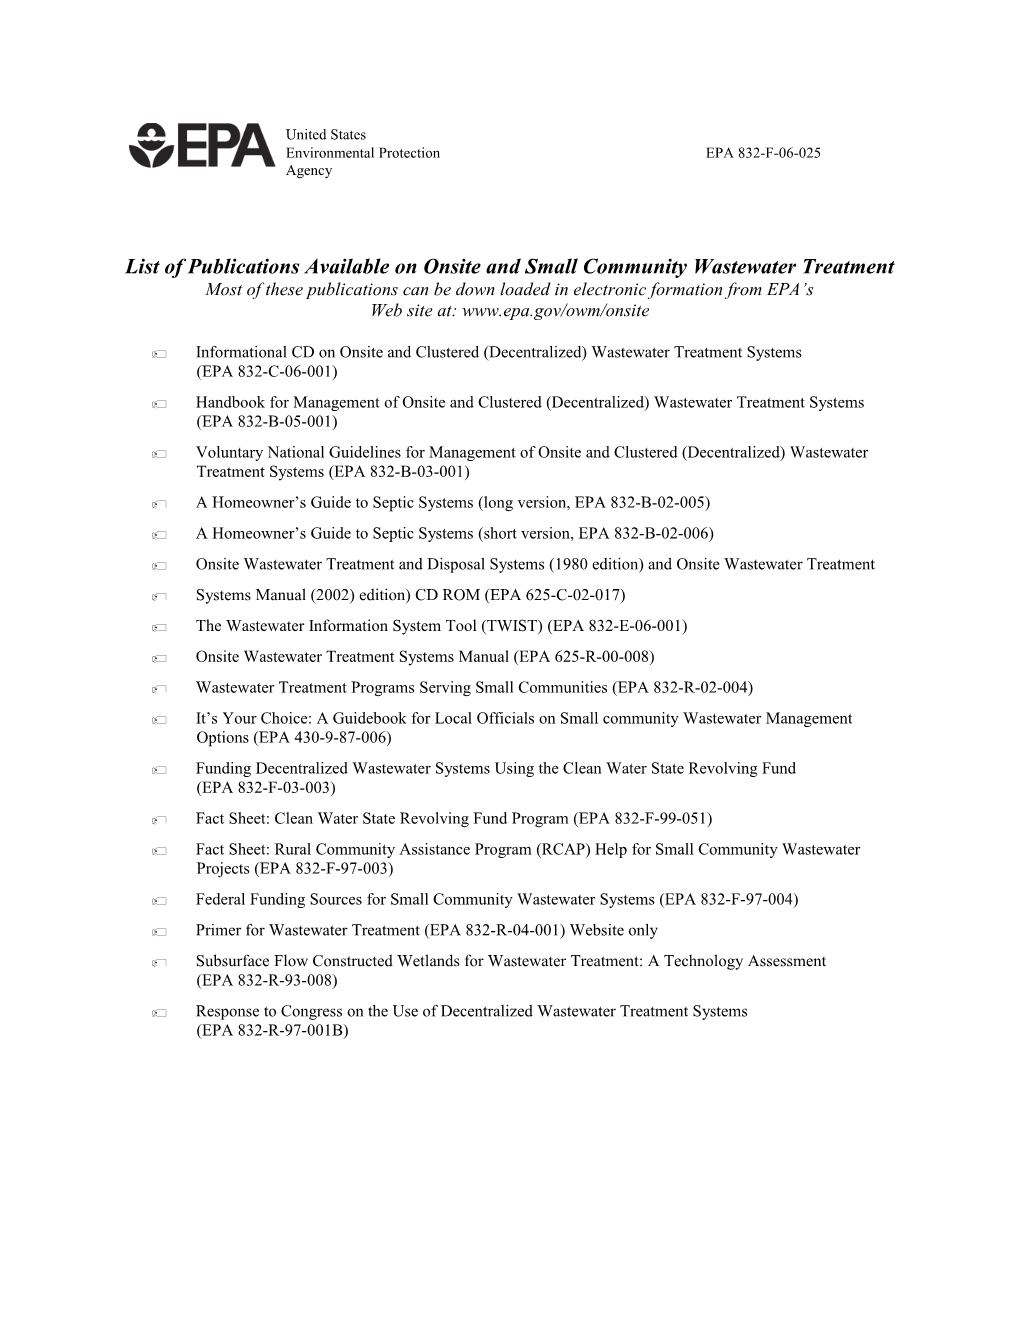 List of Publications Available Ononsite and Small Community Wastewater Treatment